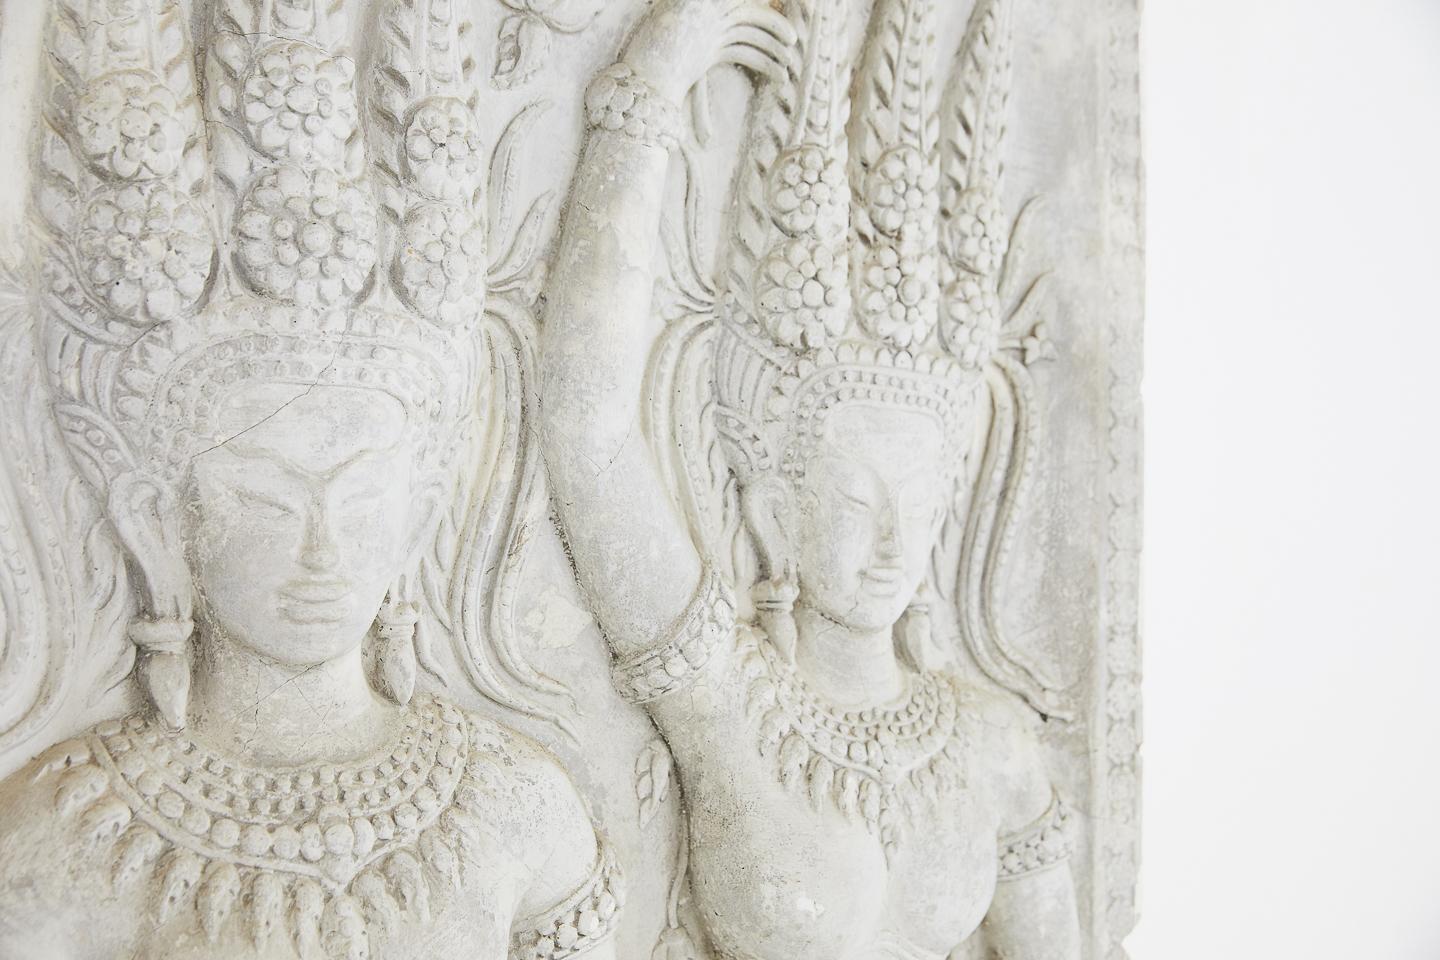 European Plaster Cast Panel of a Cambodian Angkor Wat Temple Carving